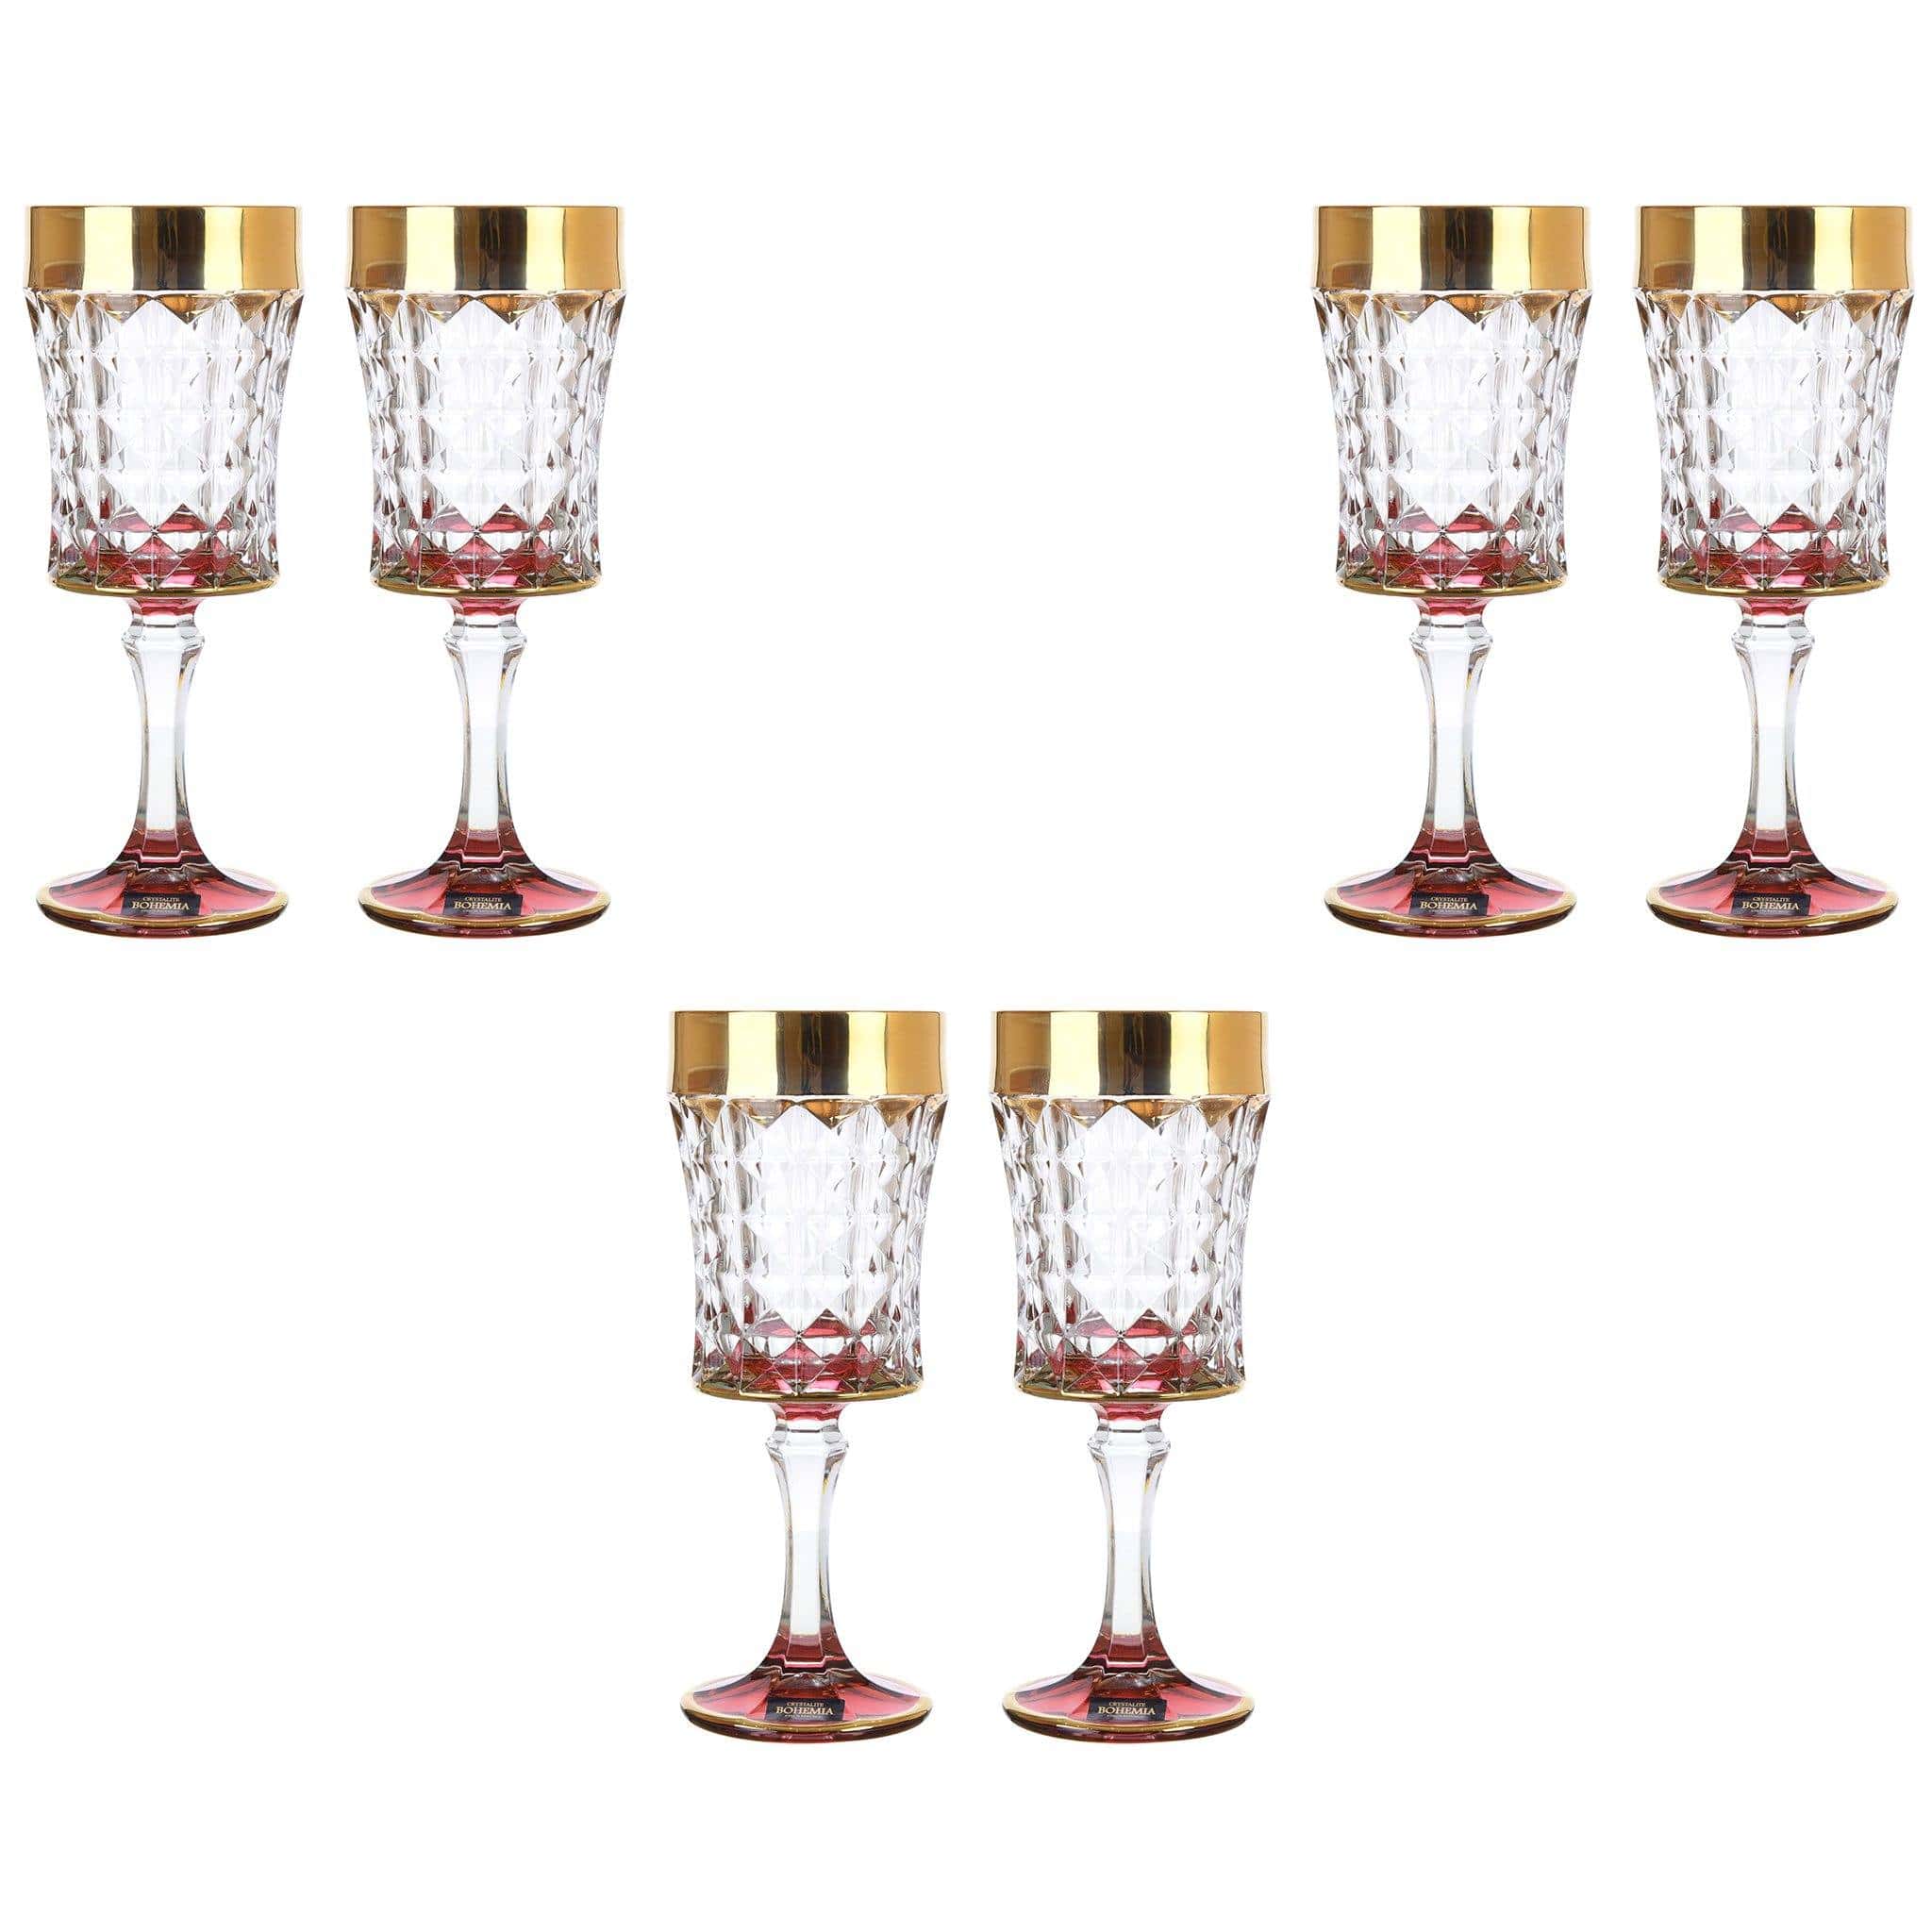 Bohemia Crystal - Goblet Glass Set 6 Pieces - Gold & Red - 200ml - 2700010489